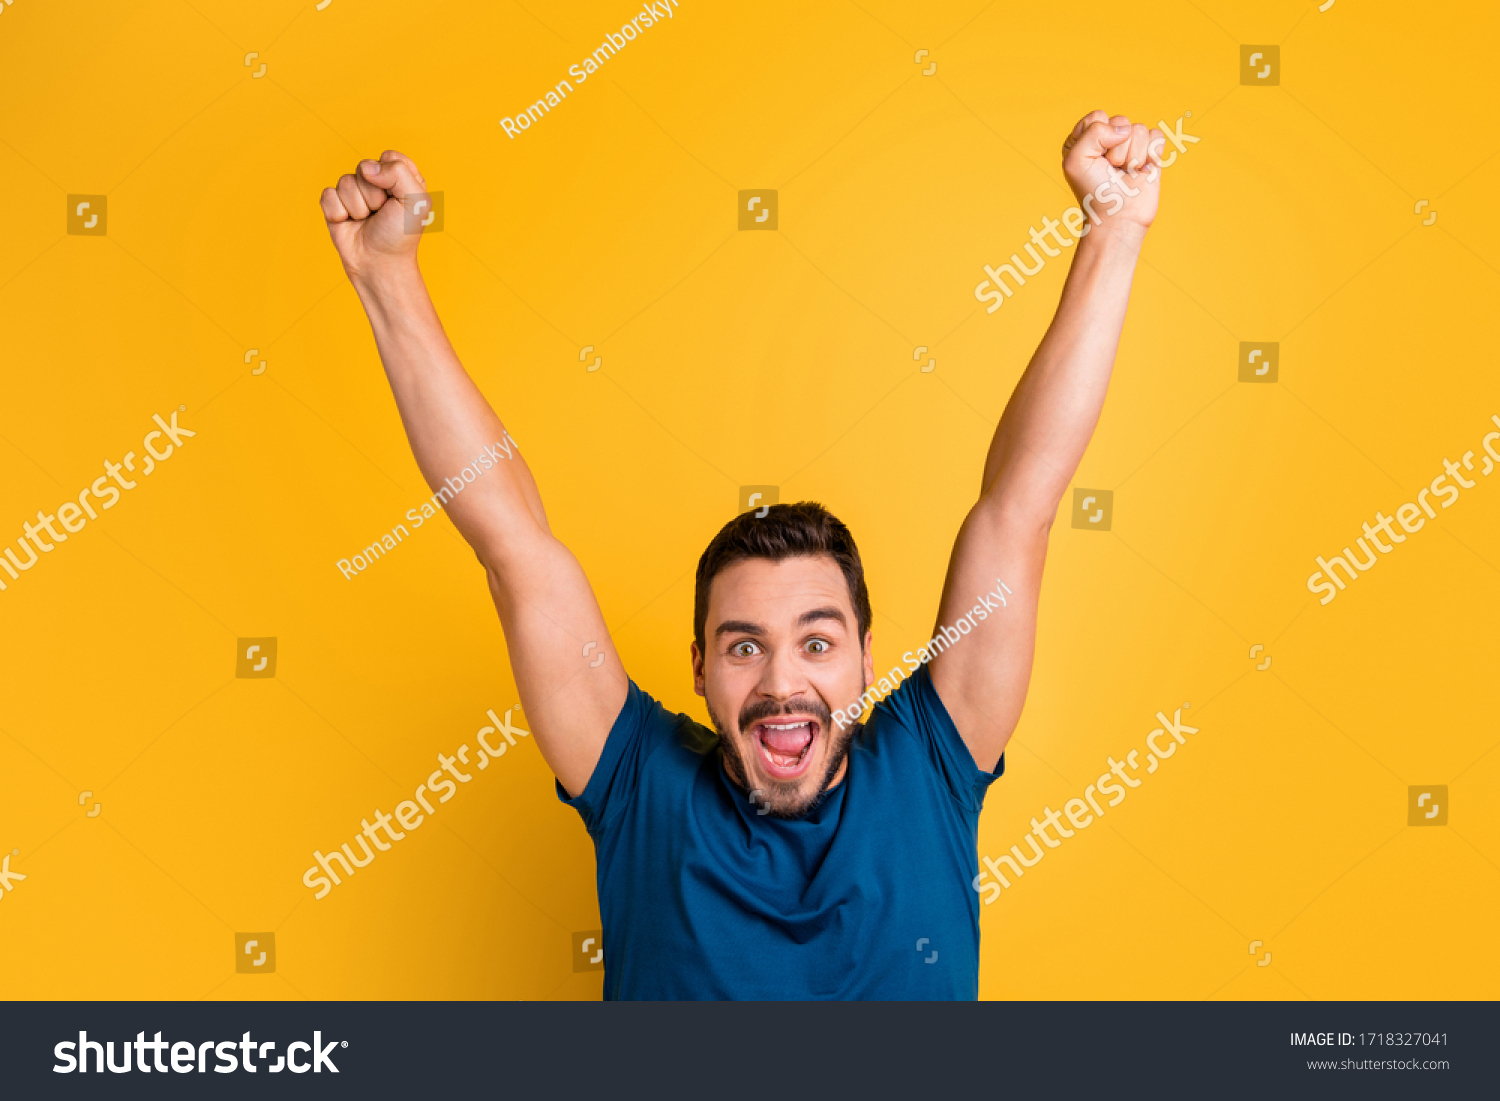 Close-up portrait of his he nice attractive glad overjoyed cheerful cheery guy celebrating raising hands up having fun isolated over bright vivid shine vibrant yellow color background #1718327041